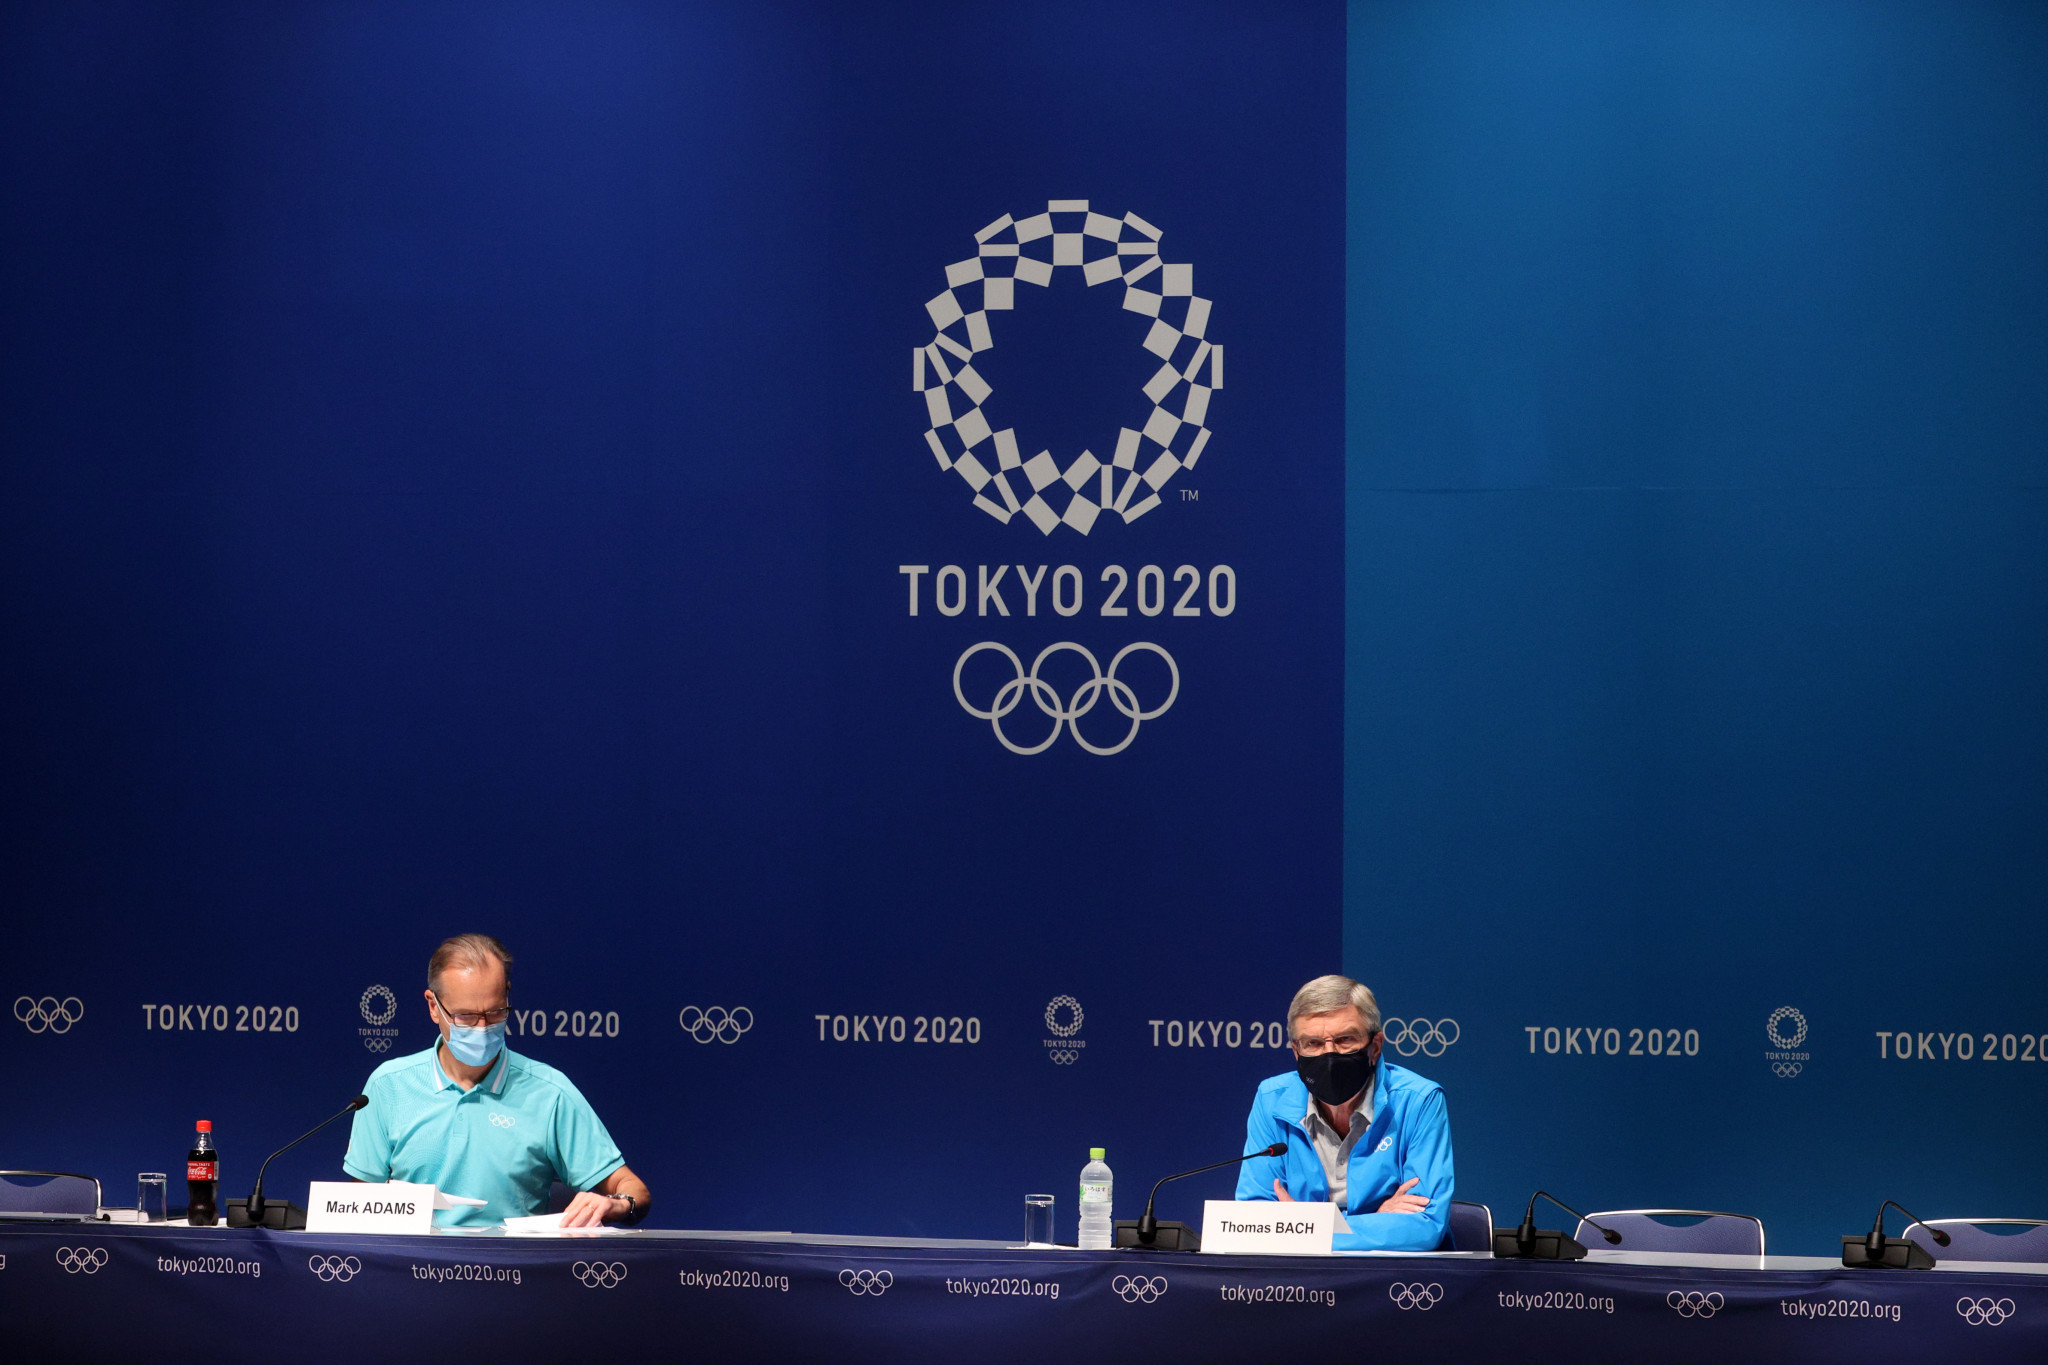 IOC leaders have rebuffed calls for Beijing 2022 to be moved, and declined questions on the Winter Games at the final press conference of the Tokyo 2020 Olympics ©Getty Images